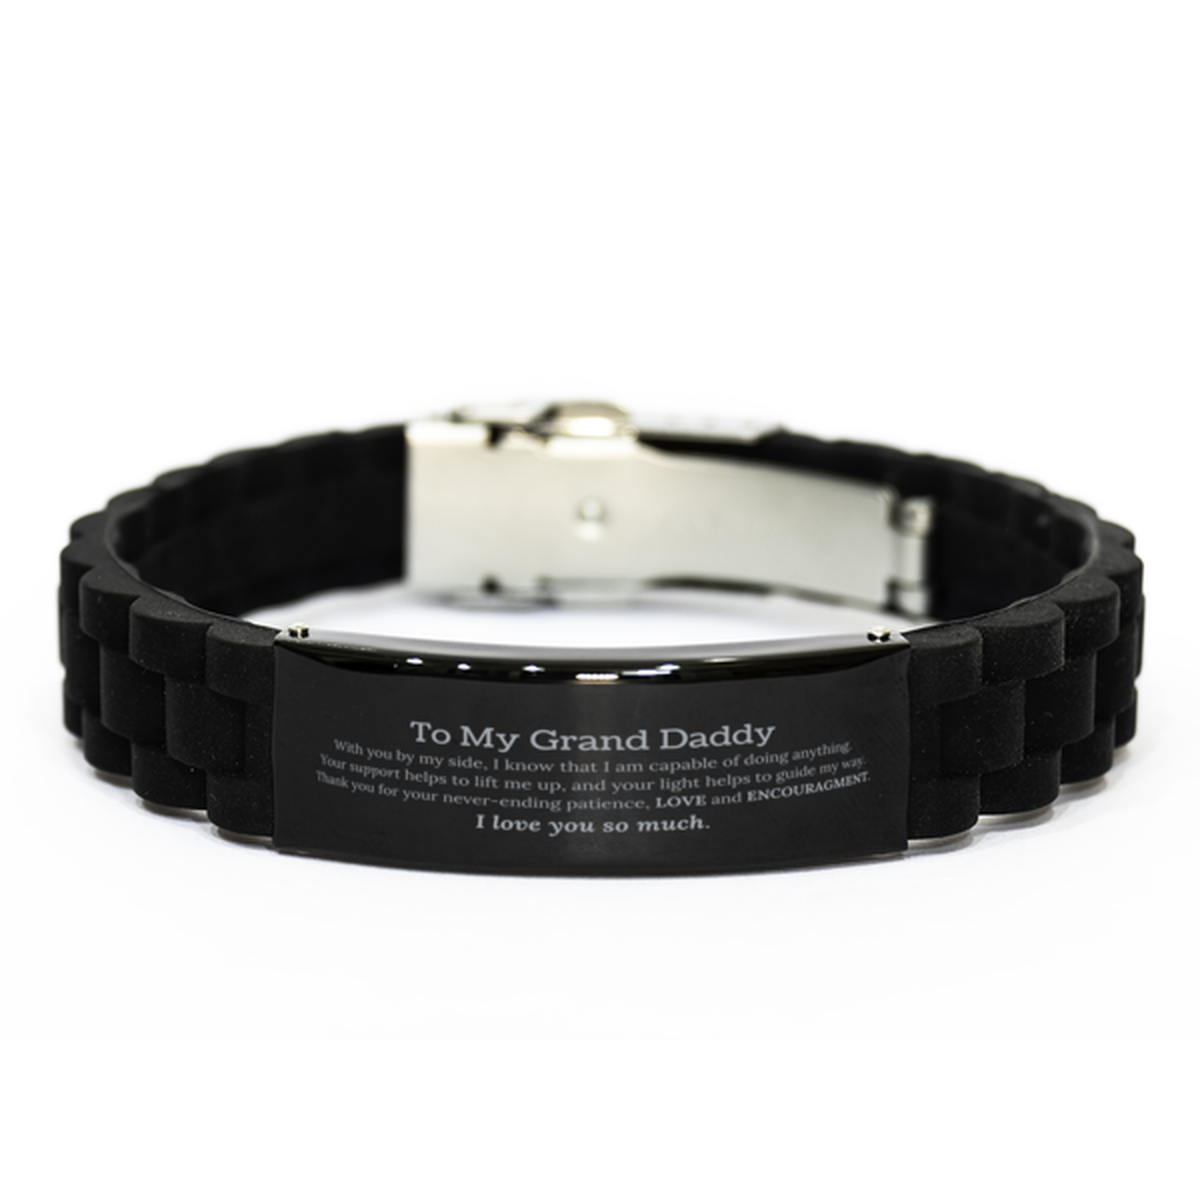 Appreciation Grand Daddy Black Glidelock Clasp Bracelet Gifts, To My Grand Daddy Birthday Christmas Wedding Keepsake Gifts for Grand Daddy With you by my side, I know that I am capable of doing anything. I love you so much